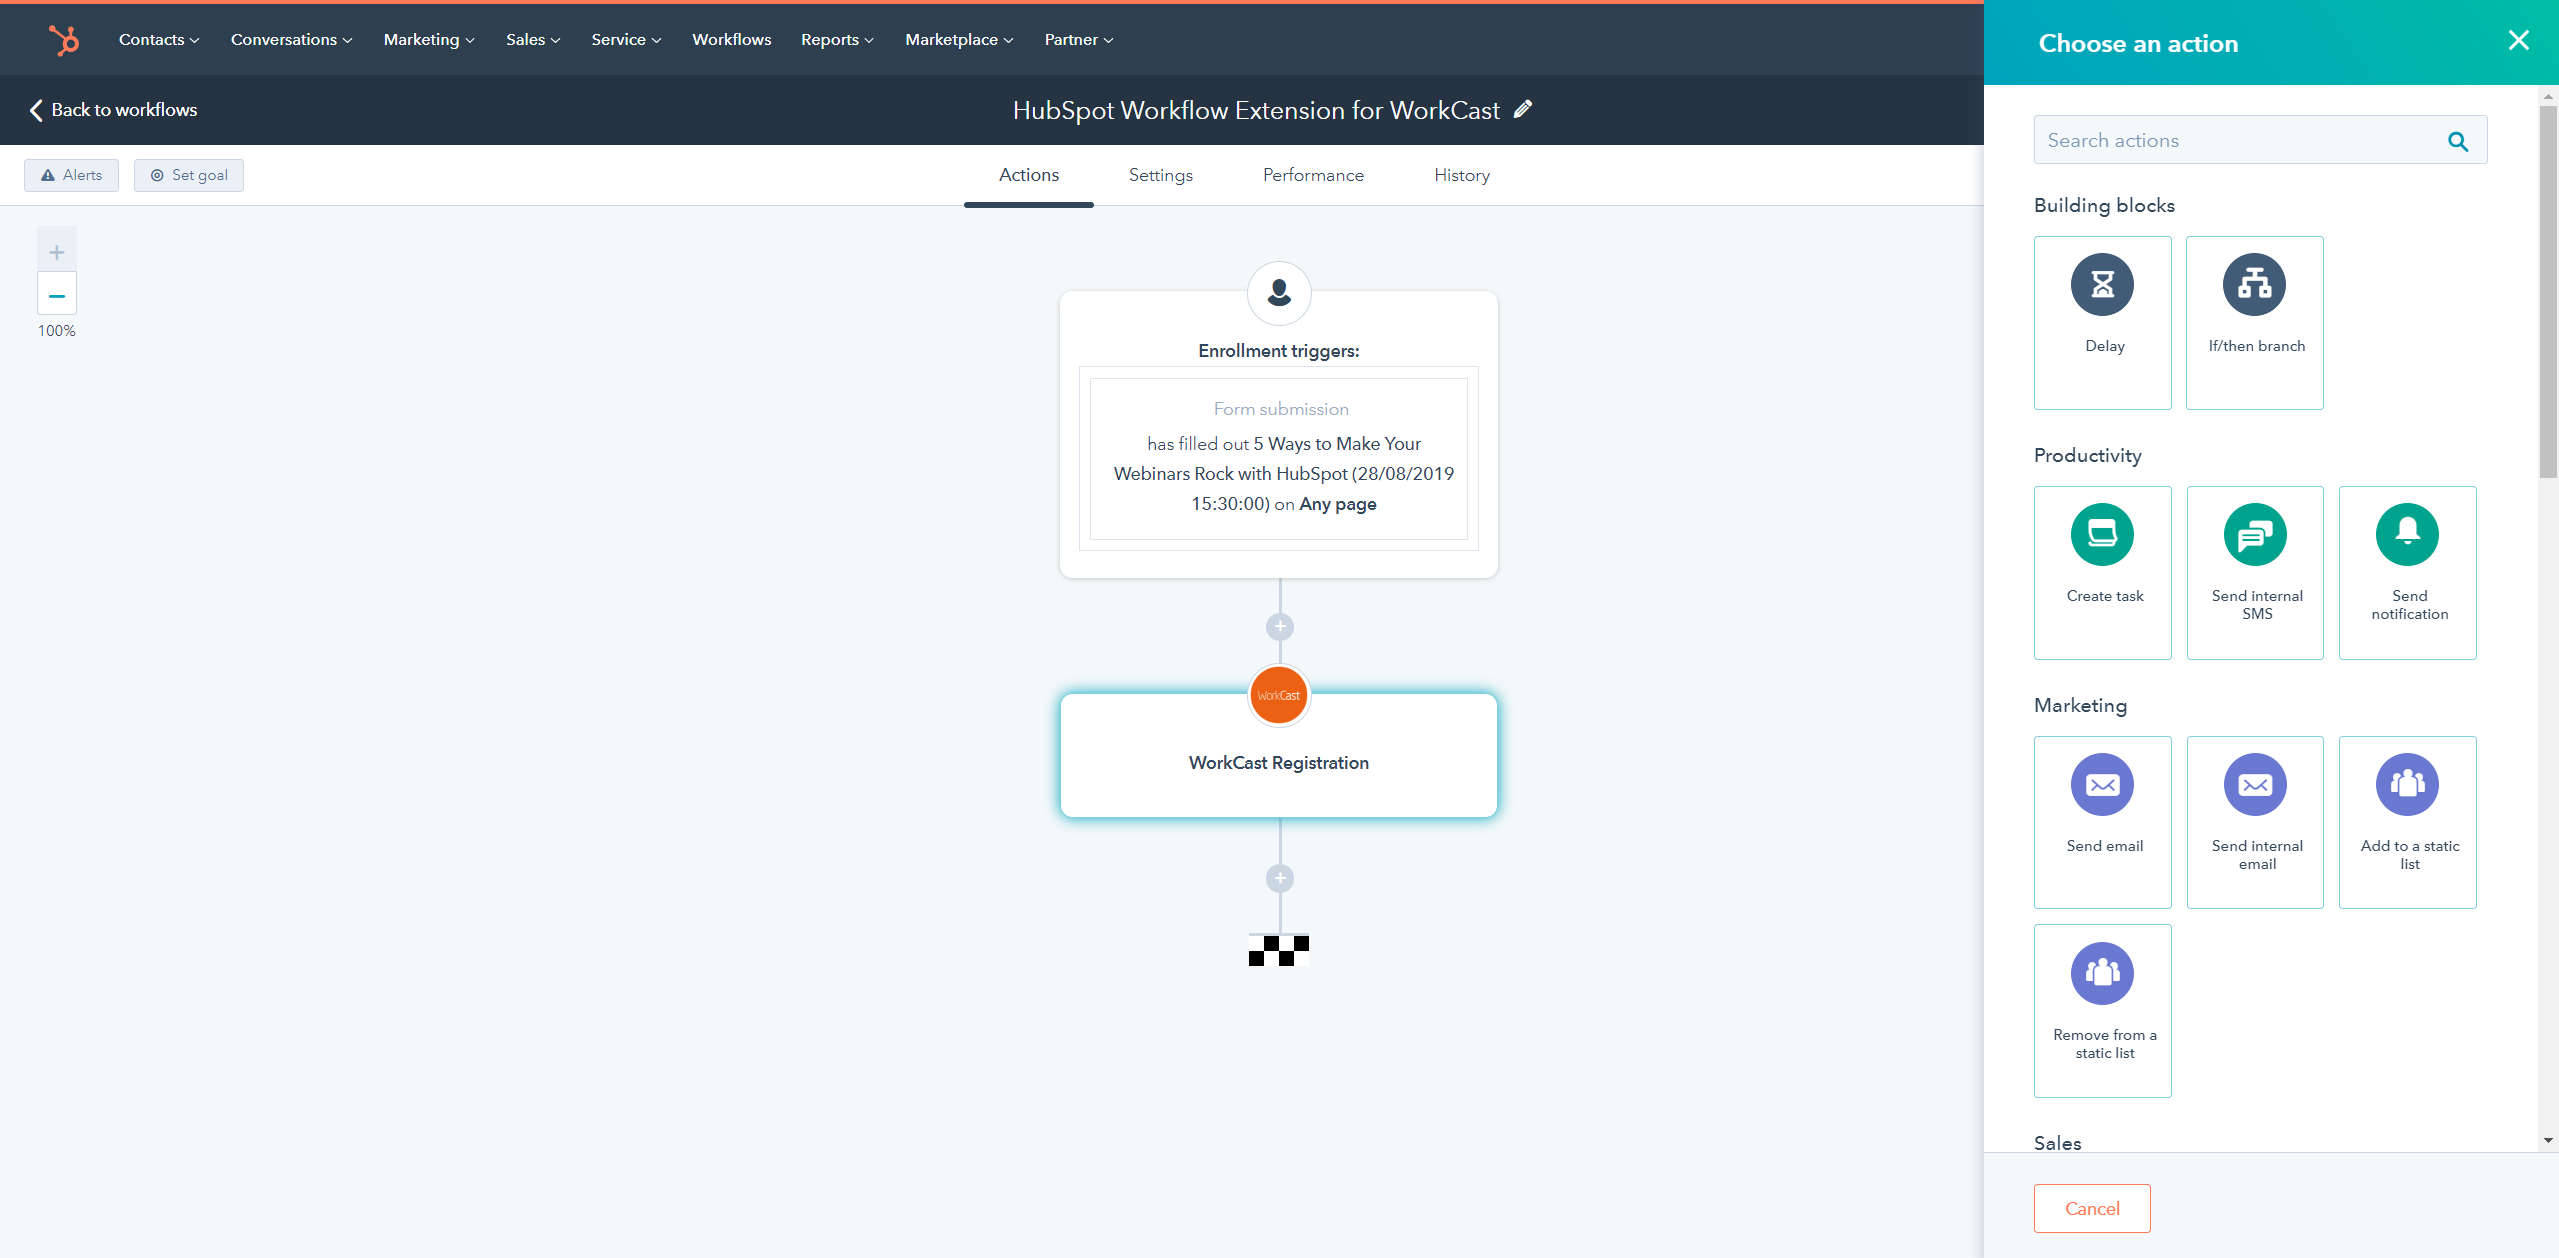 HubSpot for WorkCast workflow extension